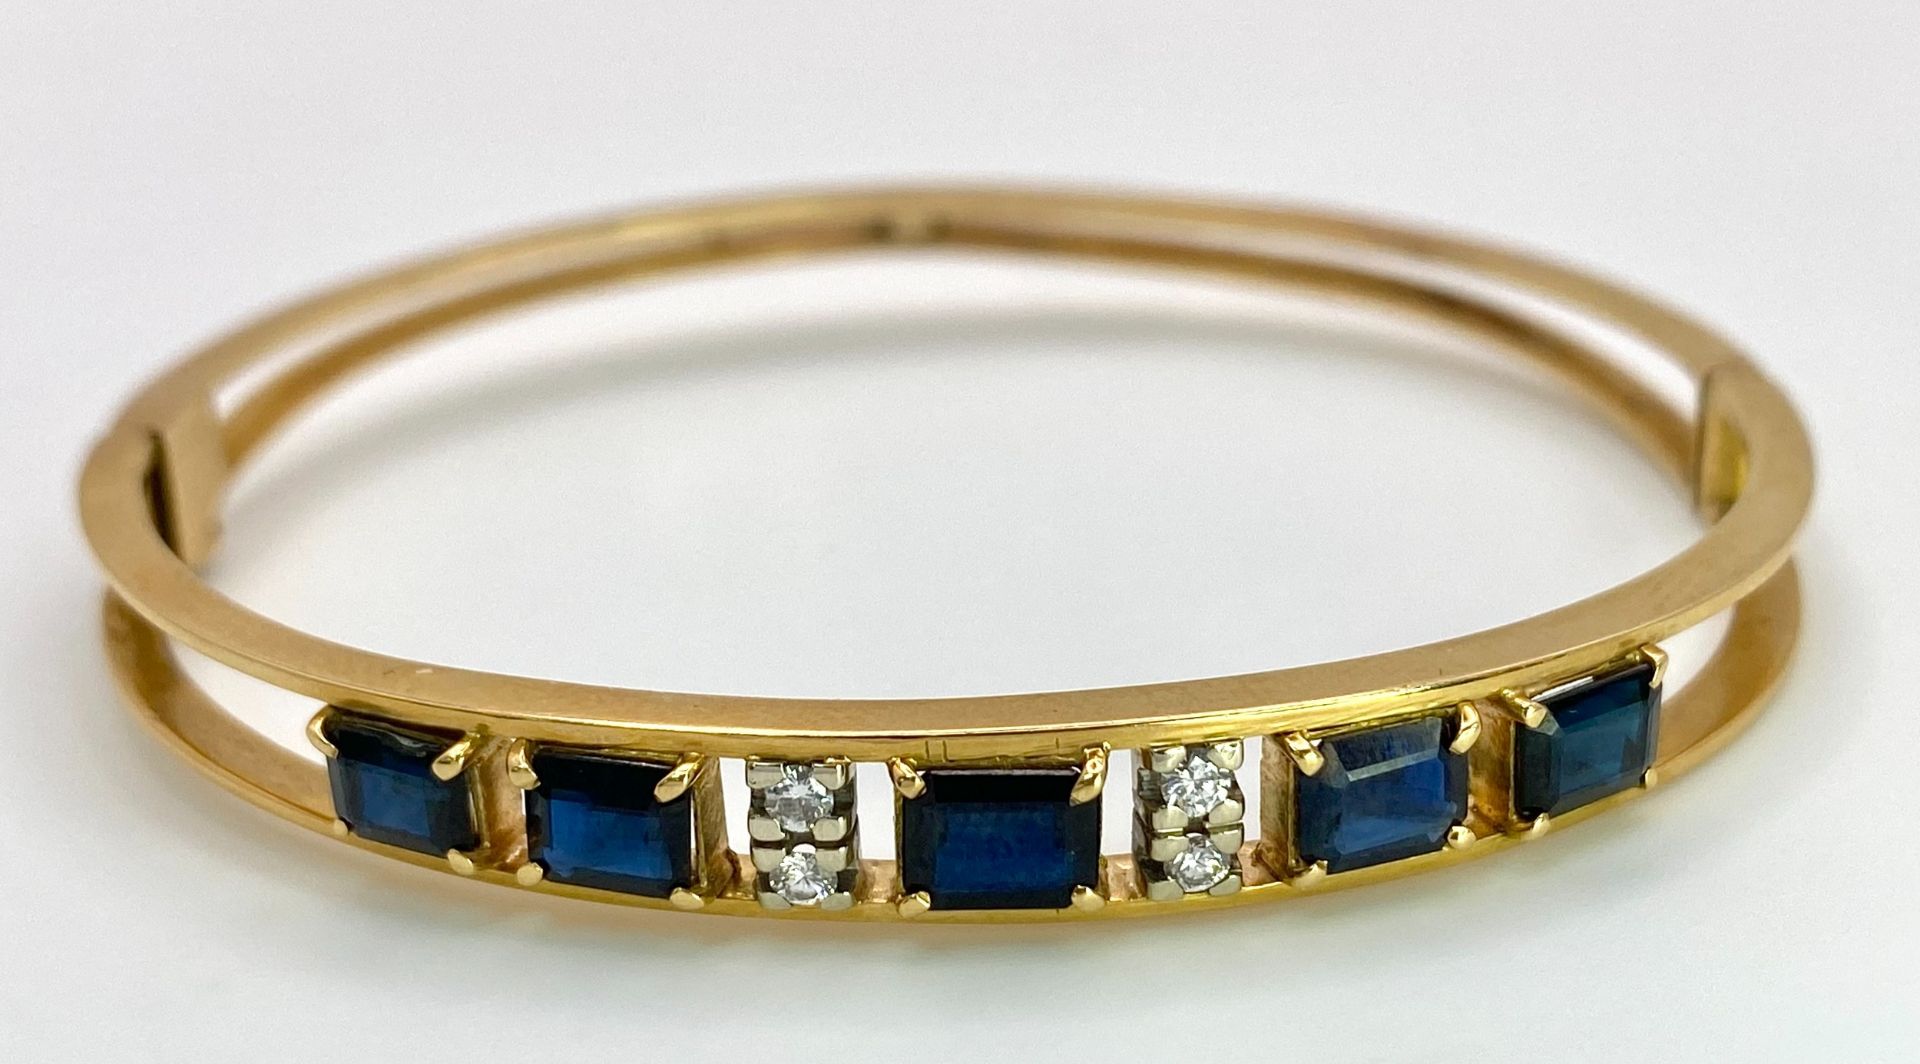 A 14K (TESTED AS) YELLOW GOLD BANGLE SET WITH 5 SAPPHIRES AND 4 DIAMONDS, 6CM DIAMETER, 15.9G (DIA: